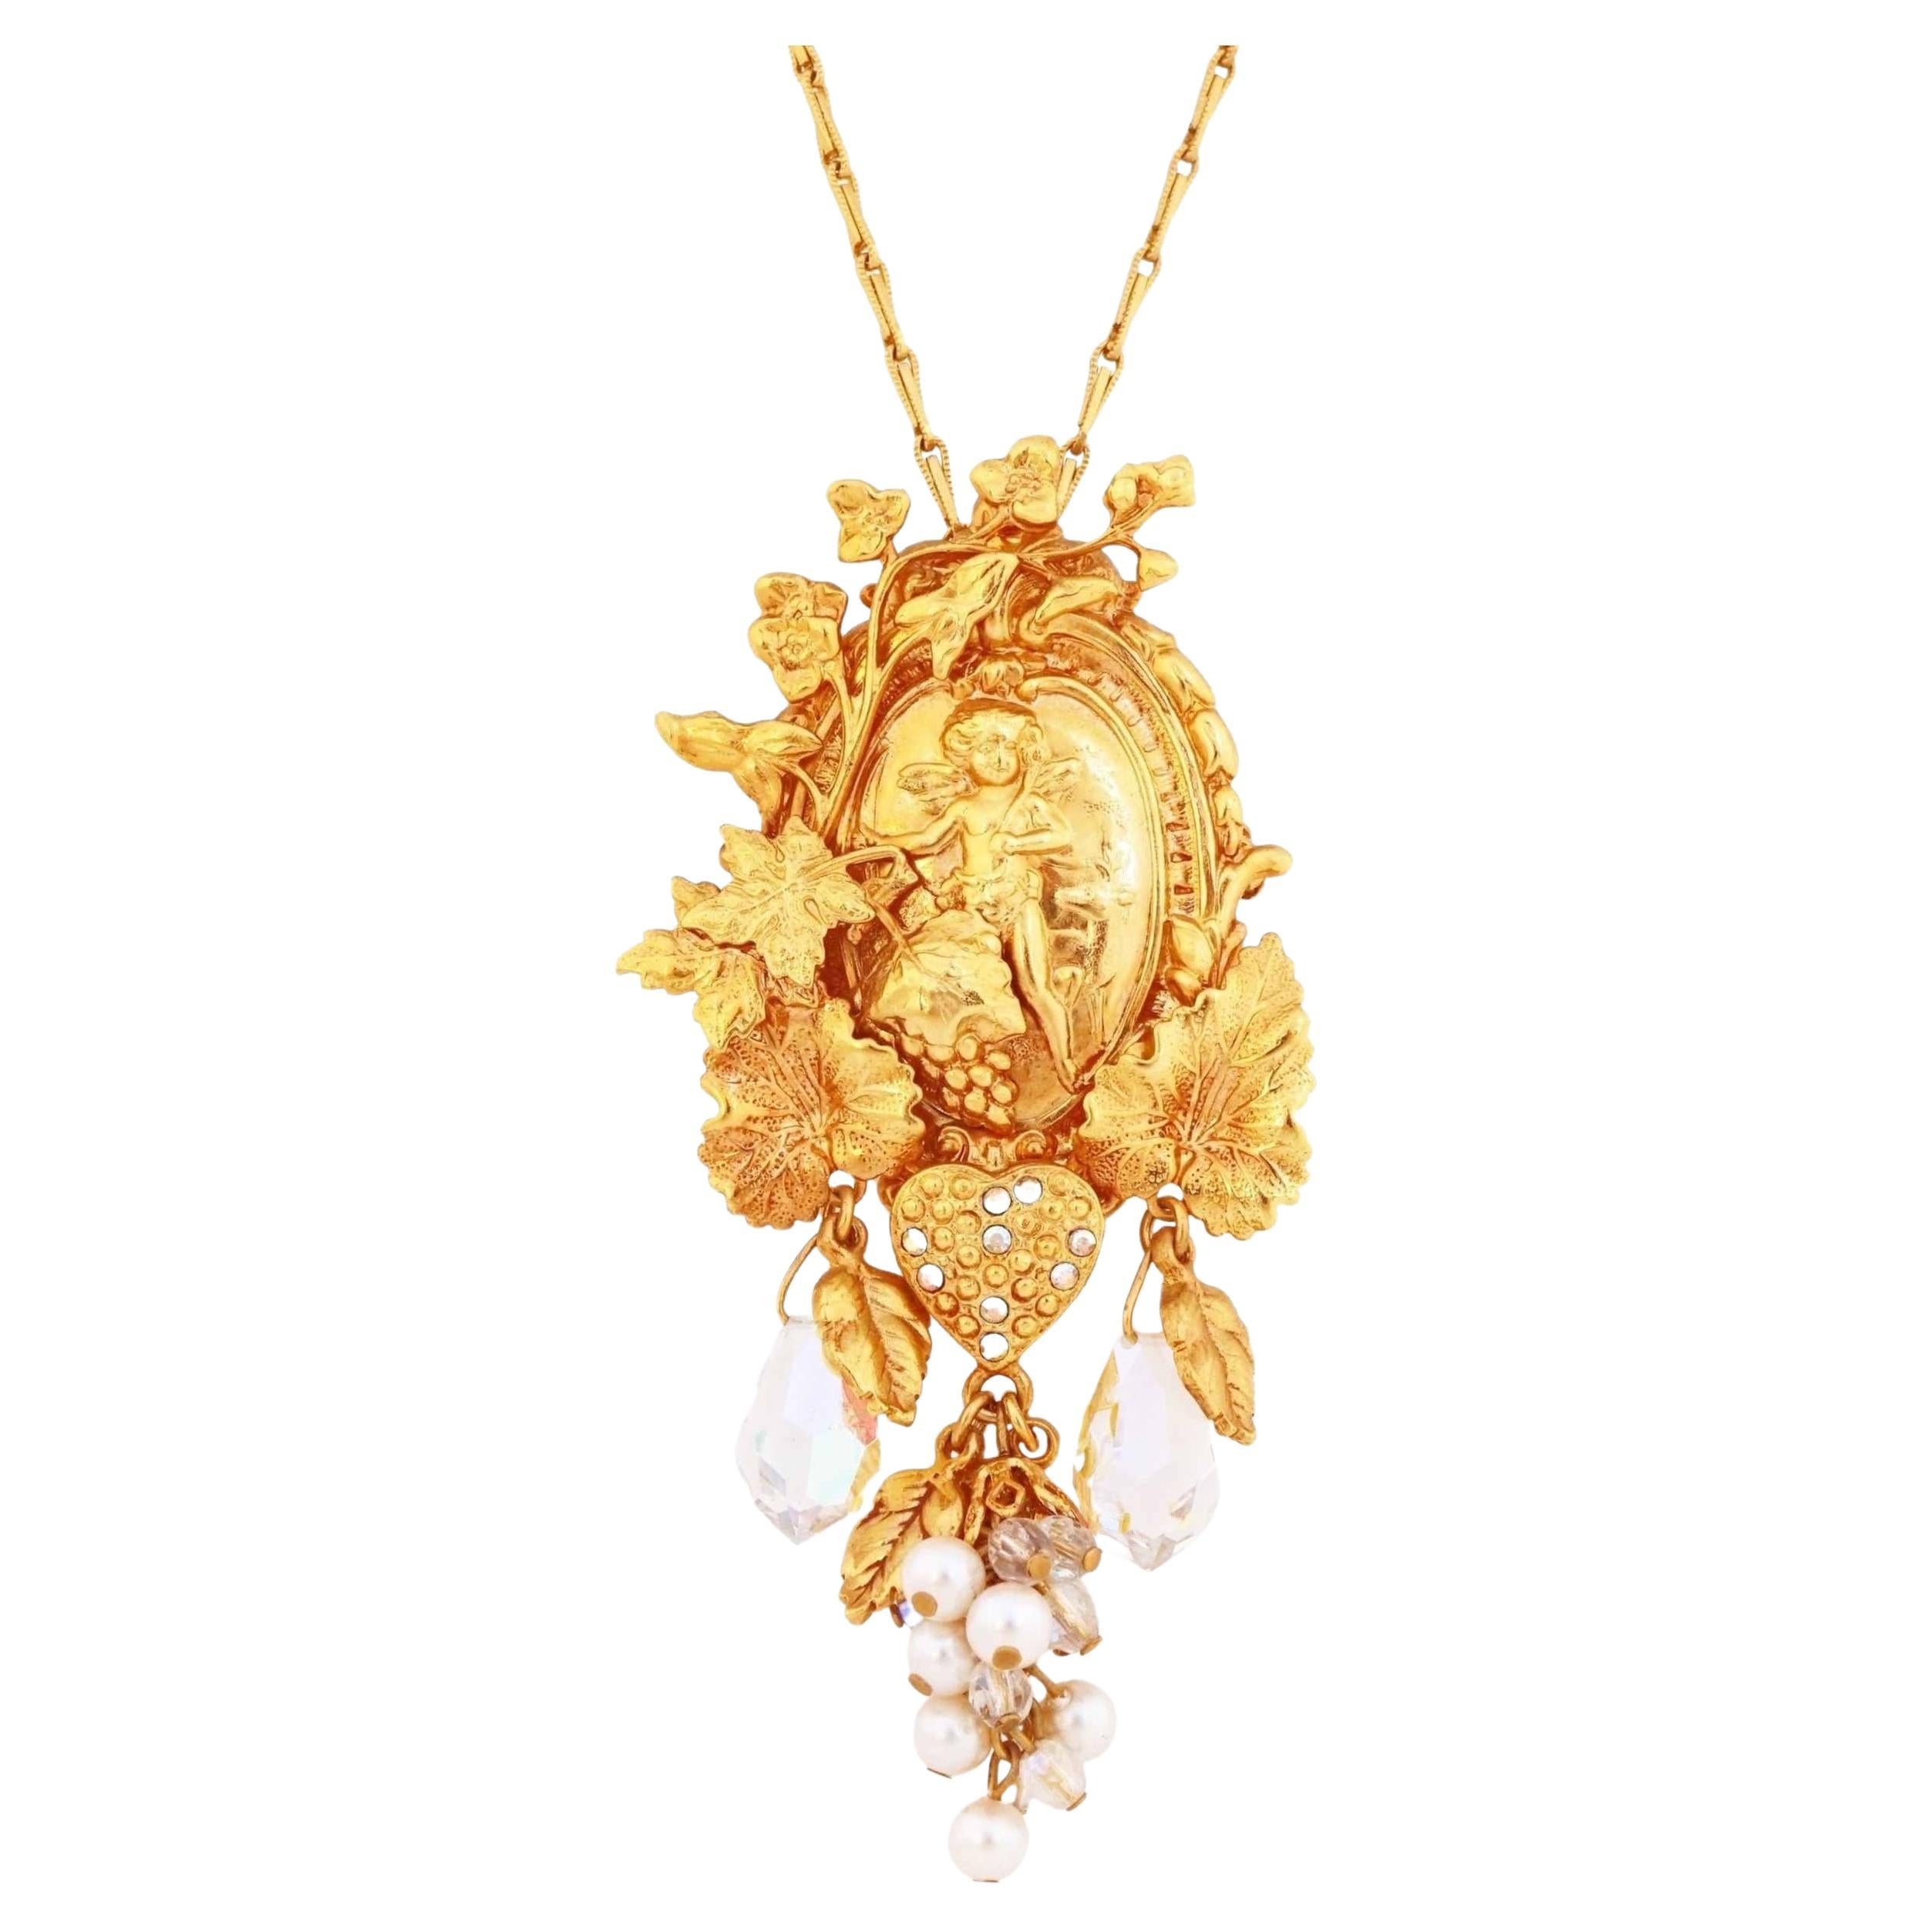 Ornate Gold Angel Pendant Necklace With Pearl & Crystal Charms By Kirks Folly